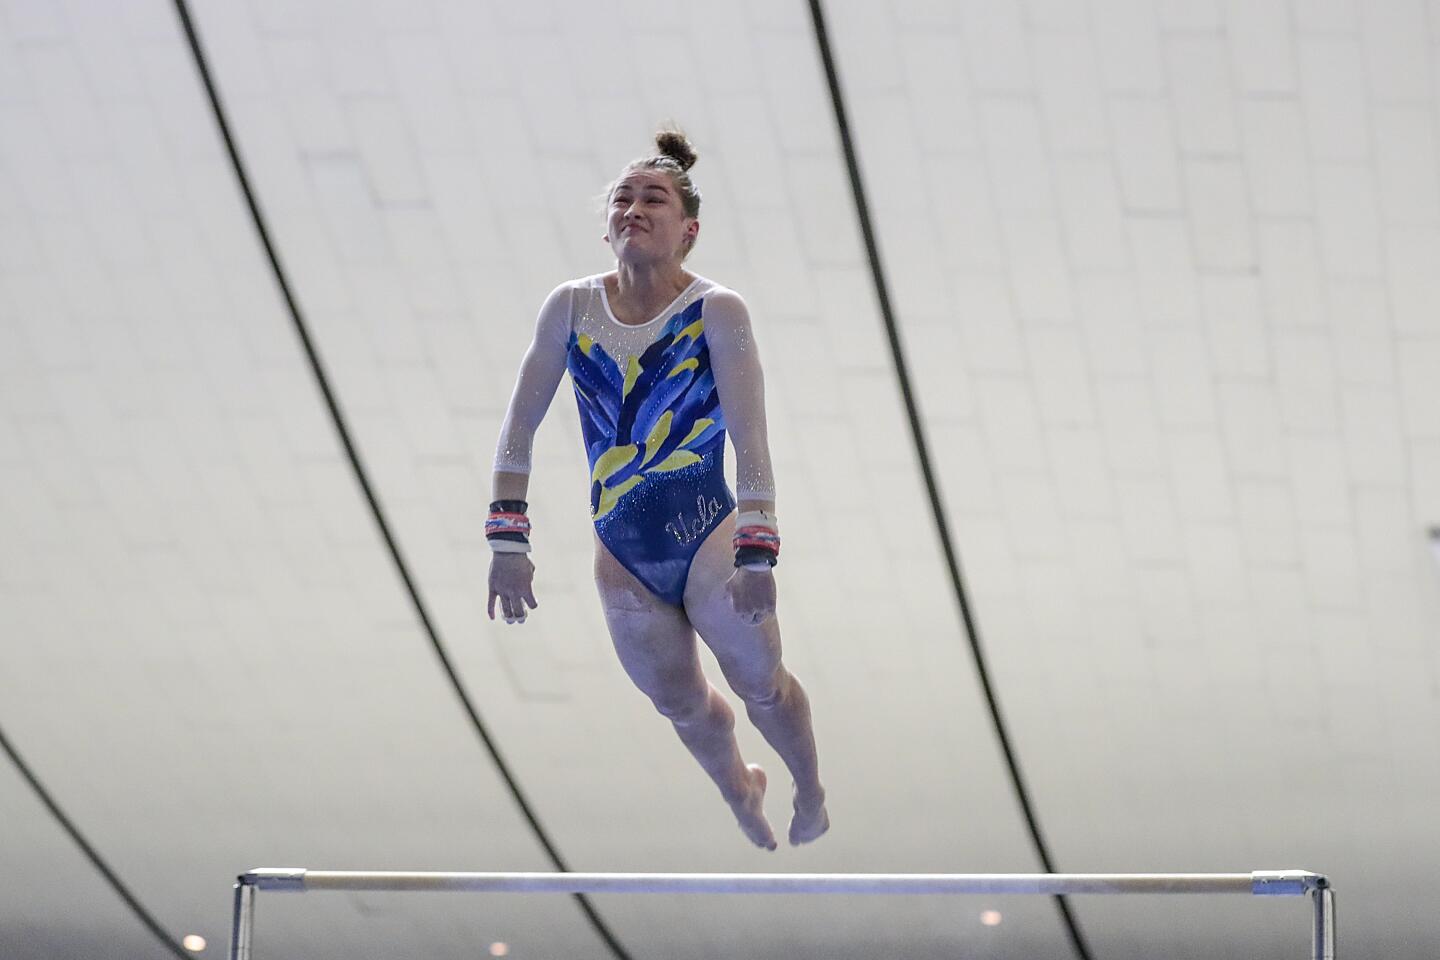 UCLA's Norah Flatley flies into her dismount during the bars competition at the Collegiate Challenge gymnastics meet at the Anaheim Convention Center.